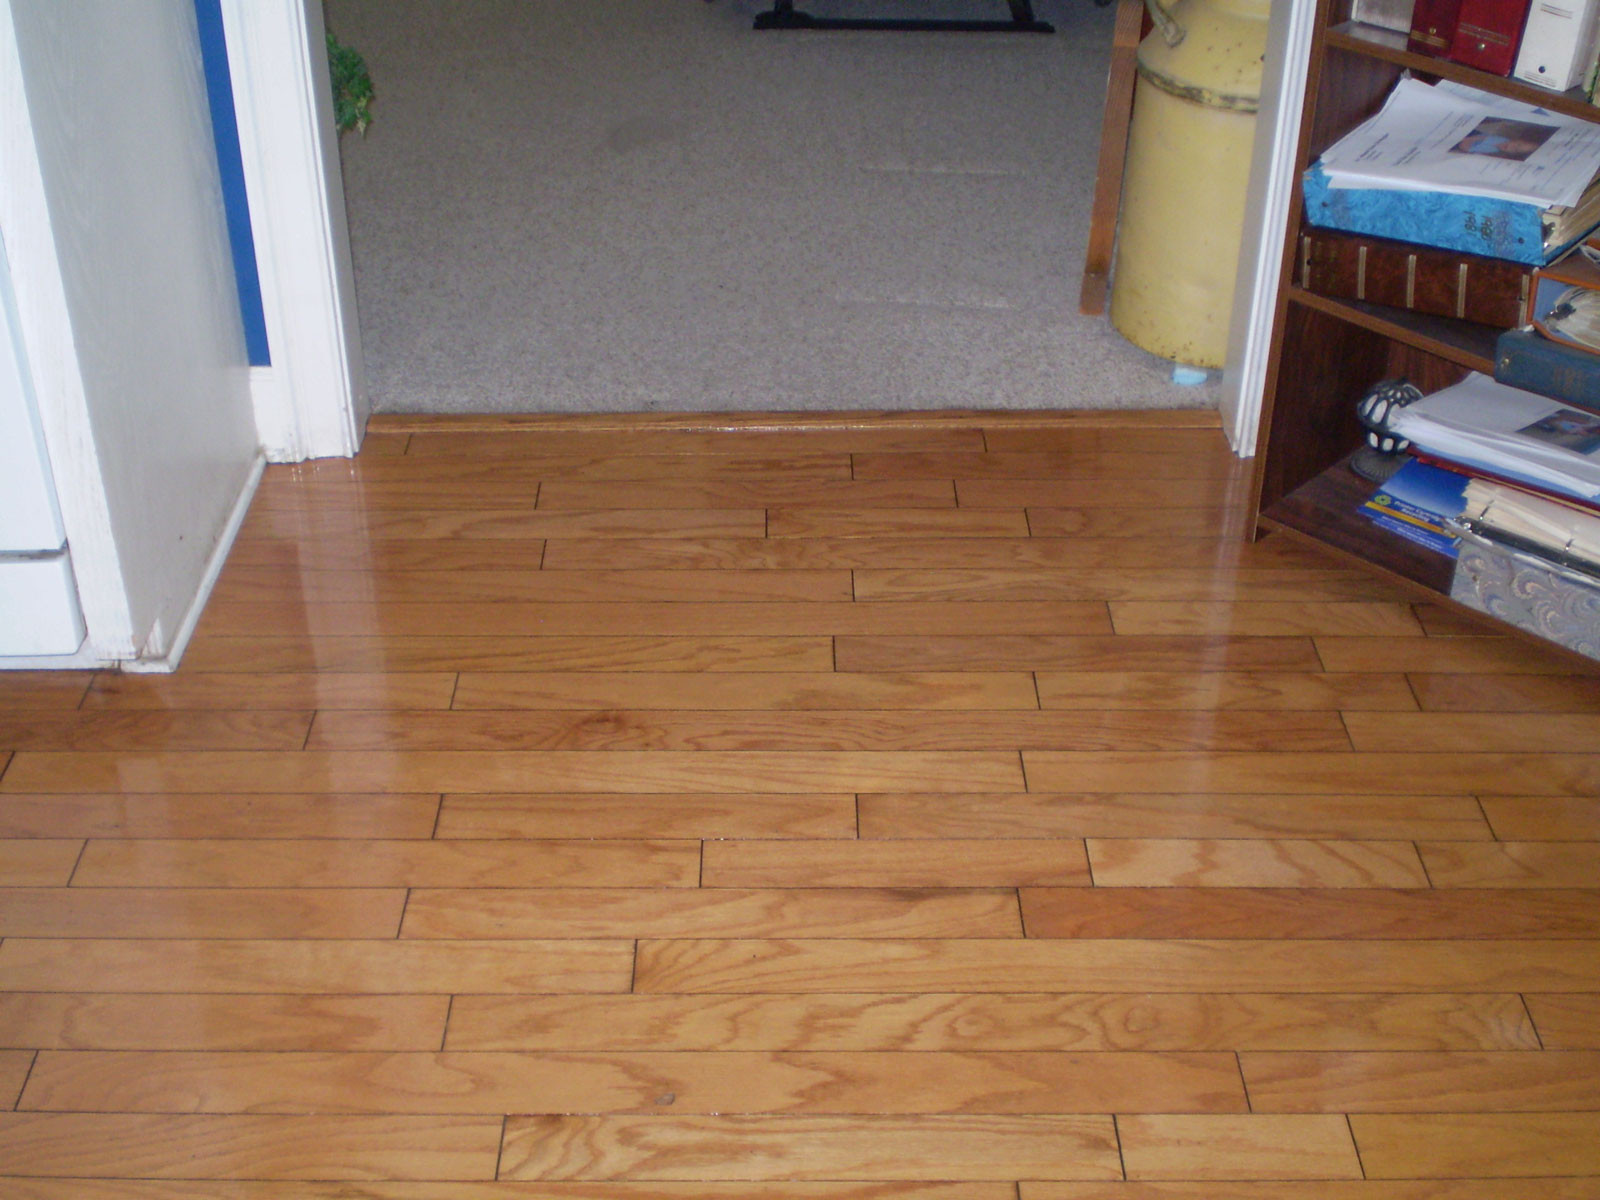 replace section of hardwood floor of how to refinish wood floors step by step evergreen hardwood floors intended for how to refinish wood floors step by step will refinishingod floors pet stains old without sanding